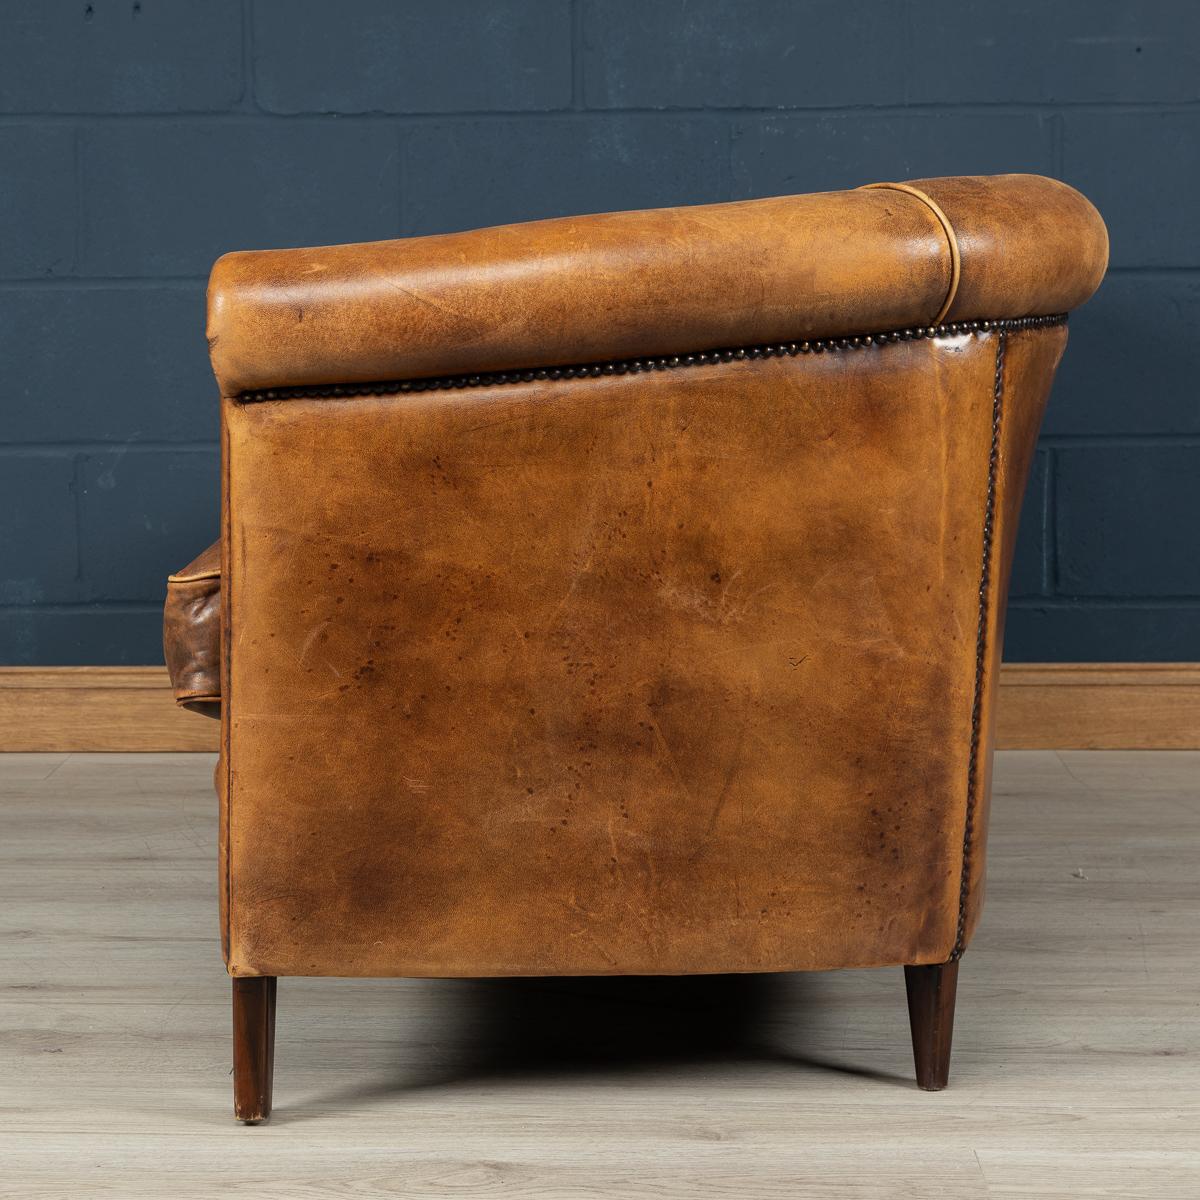 A wonderful leather two-seat sofa in rich tan leather, north European (probably Dutch), mid-late 20th century.

Please note that our interior pieces are located at our interior design showroom in Buckinghamshire.
 